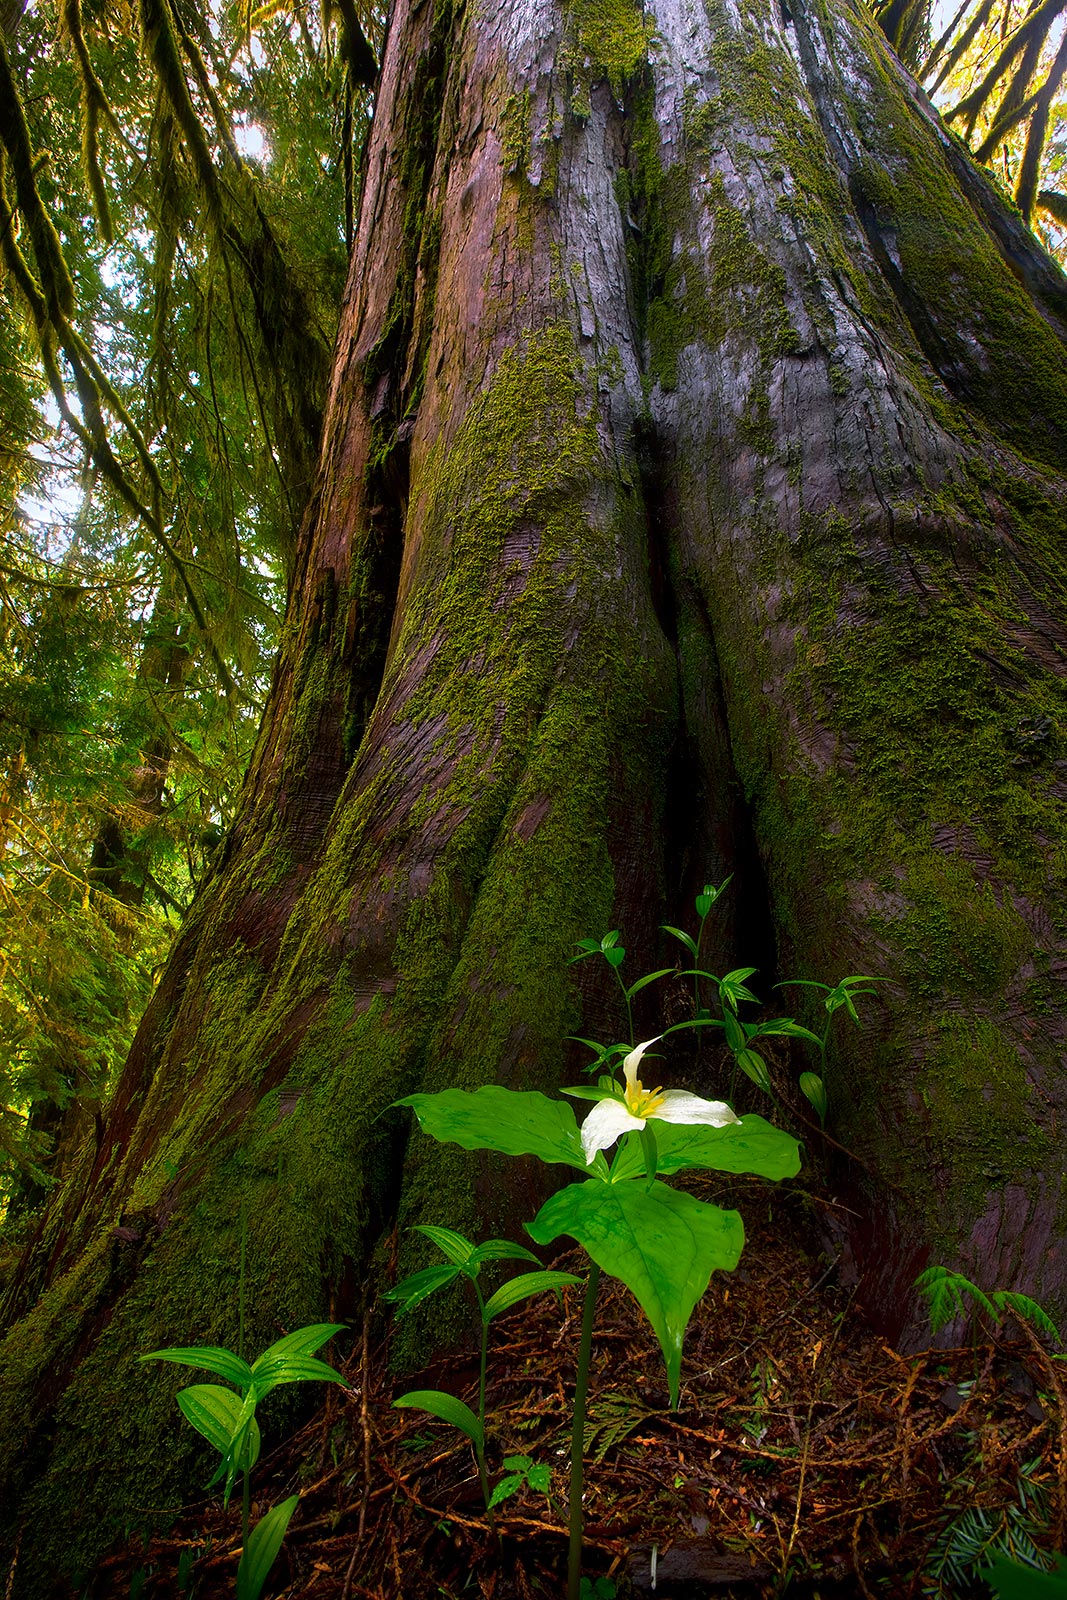 A tiny Trillium flower at the base of an enormous Red Cedar captured deep in Washington's Quinault Rainforest.